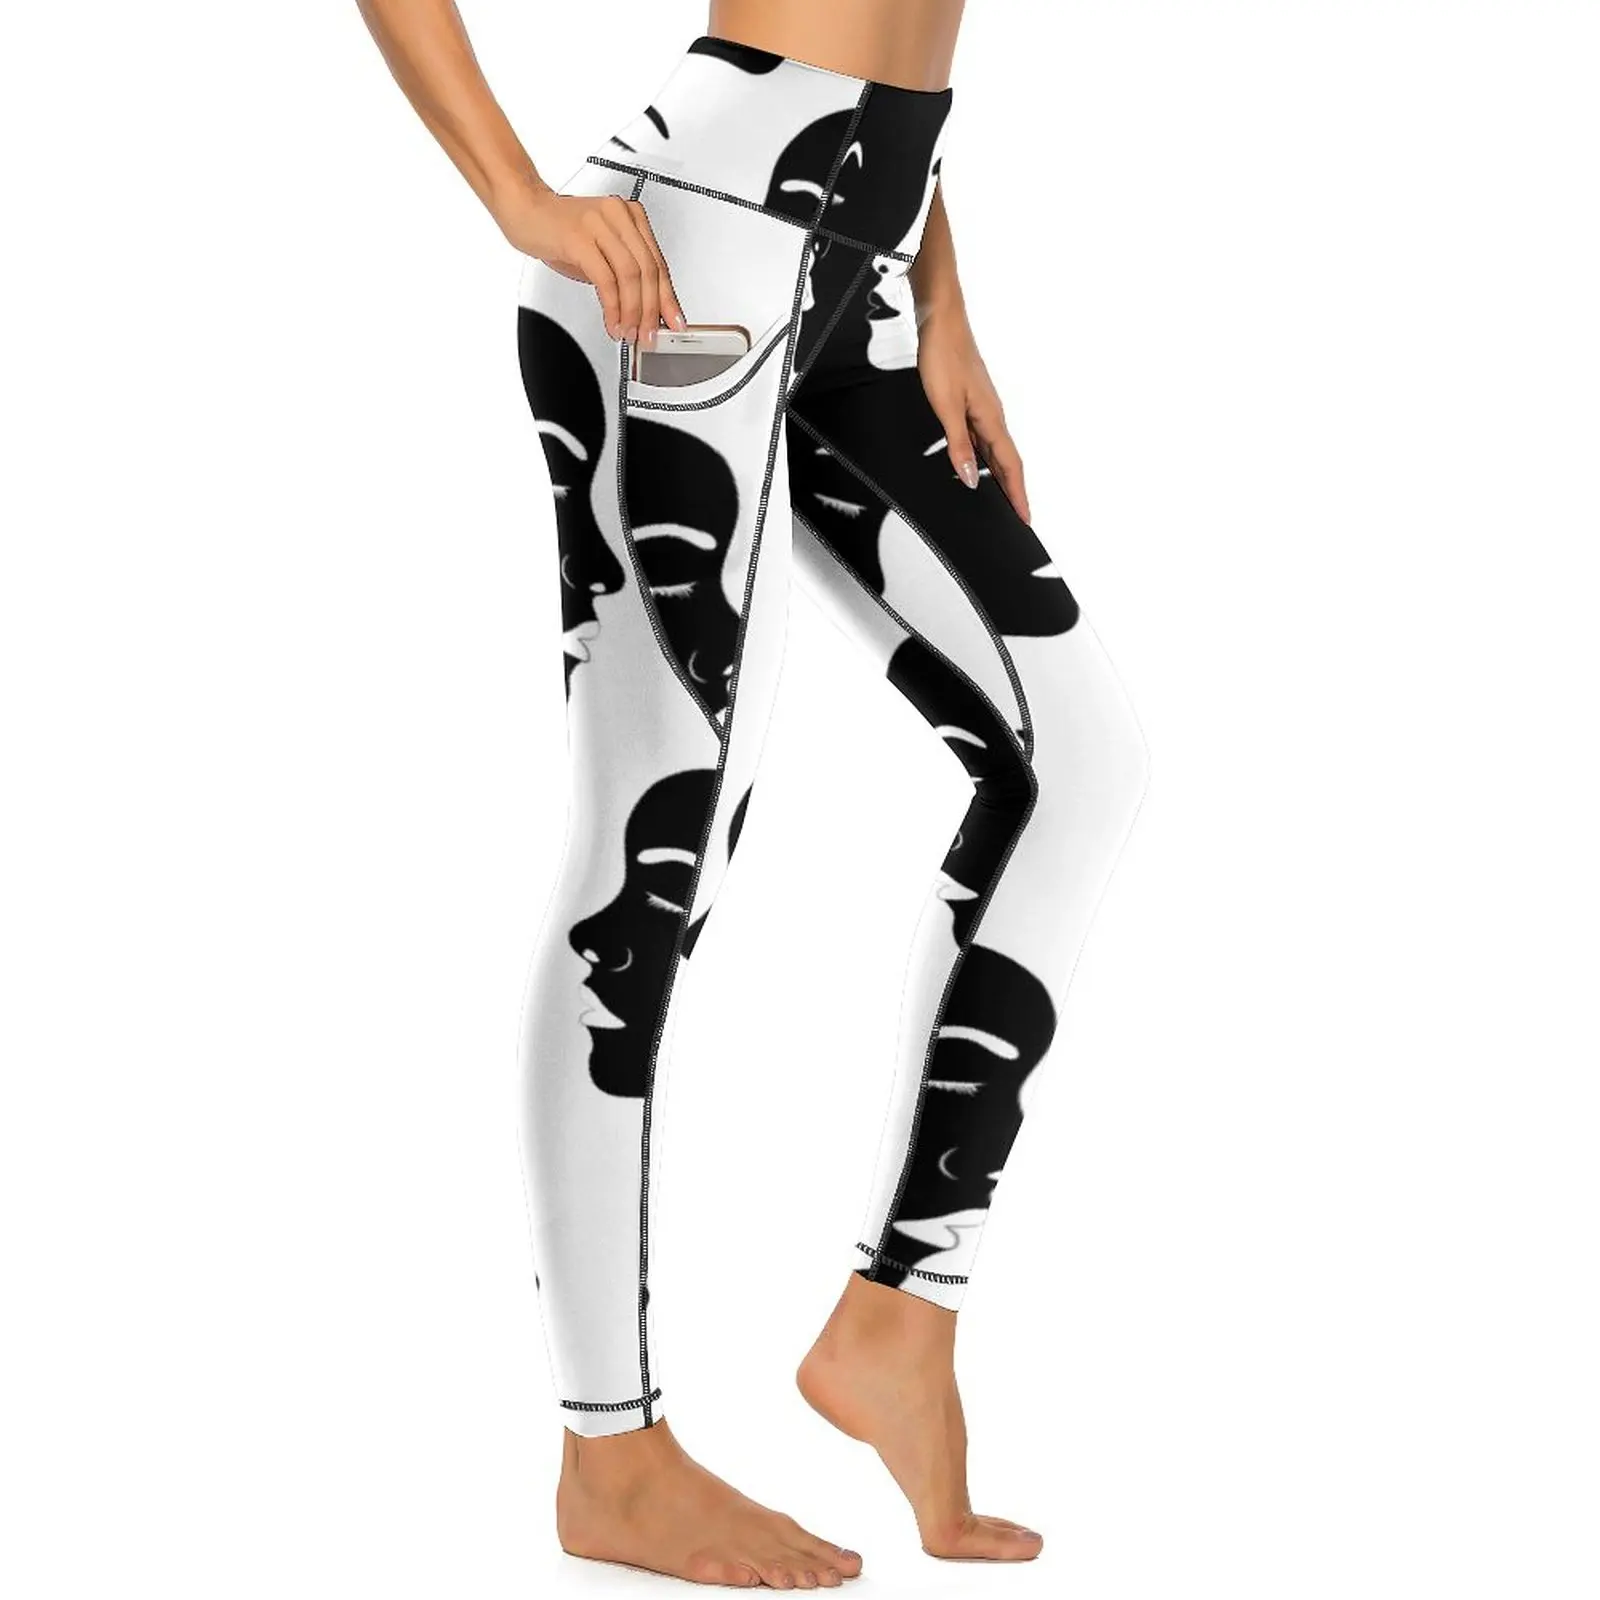 

White And Black Women Head Yoga Pants Sexy We Are All The Same Graphic Leggings High Waist Leggins Lady Quick-Dry Sports Tights